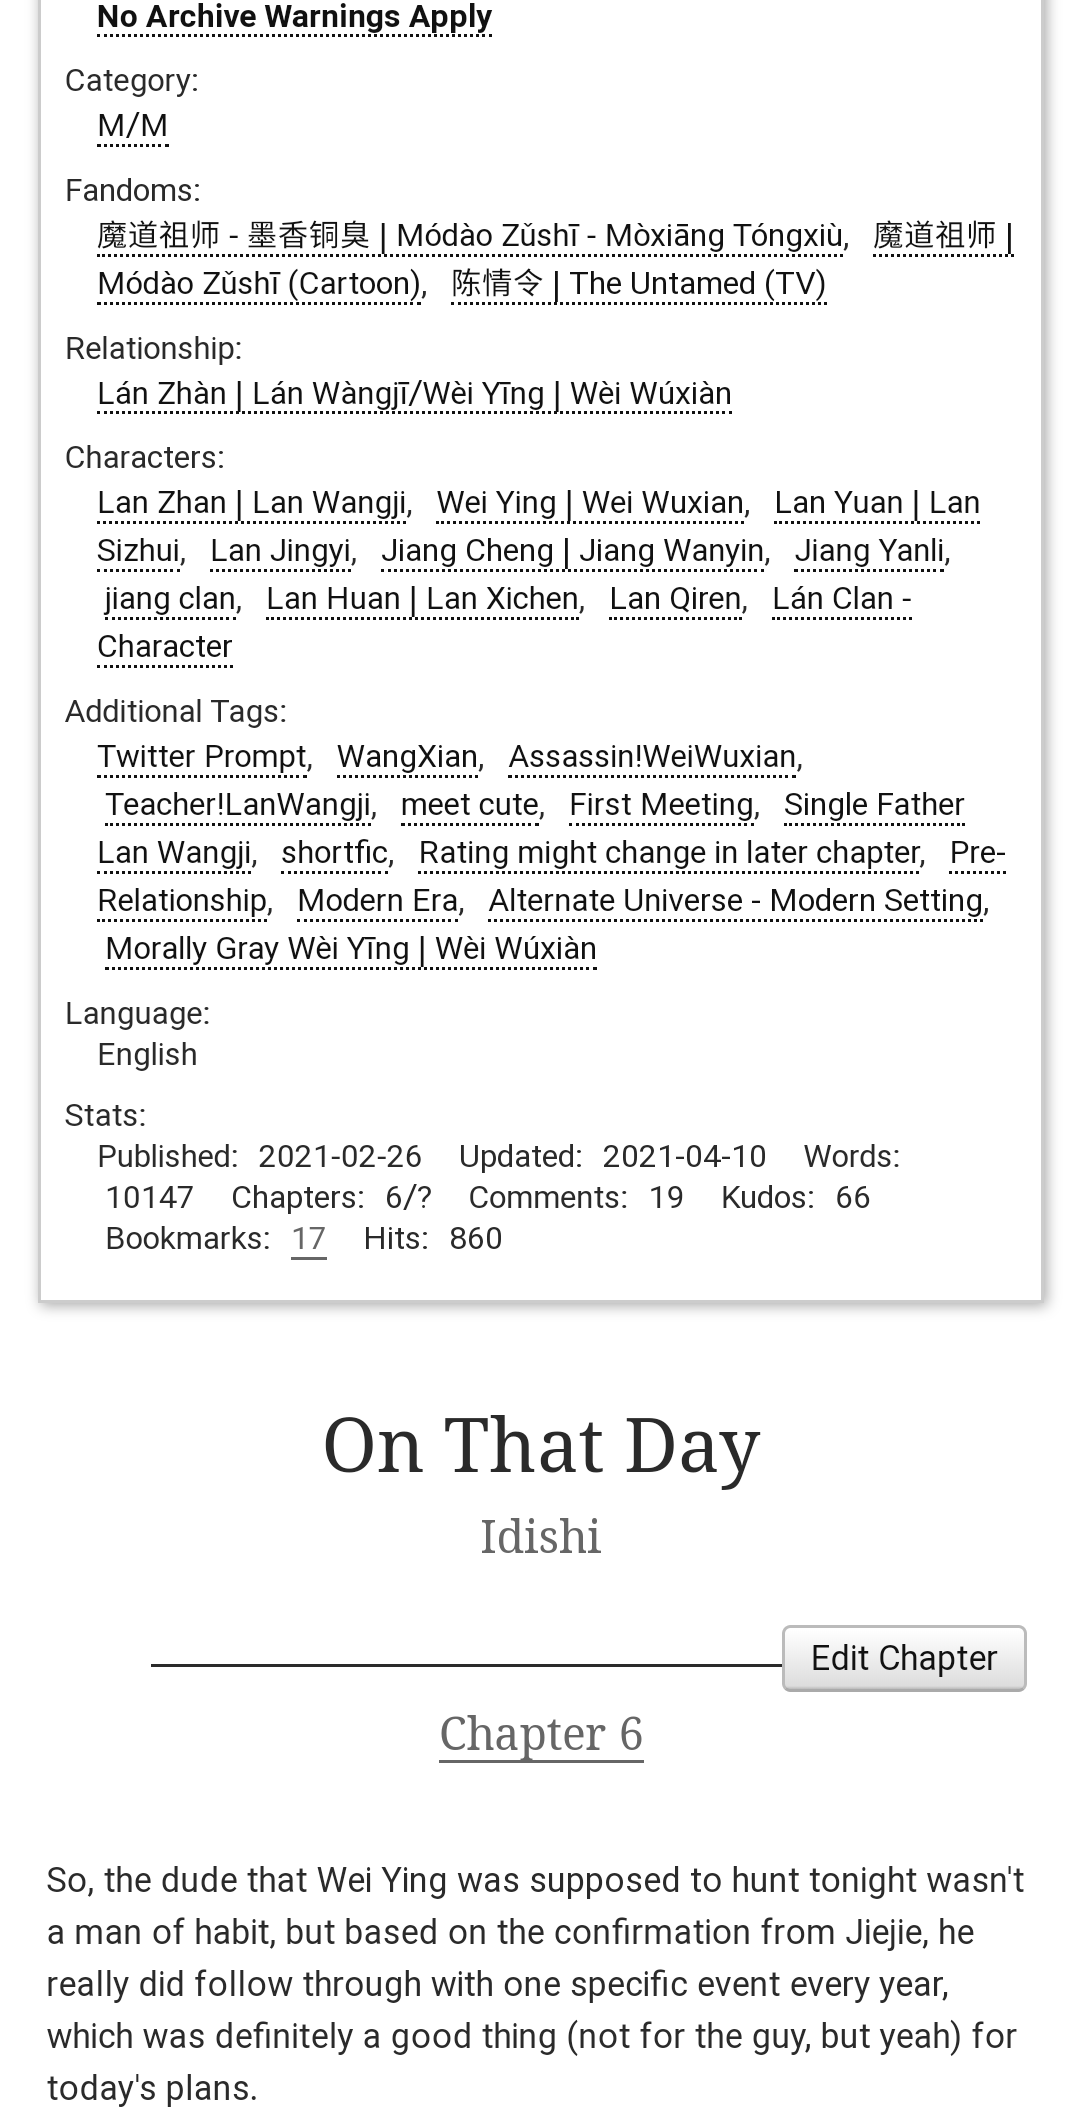 Chapter 6 of "On That Day" is up!